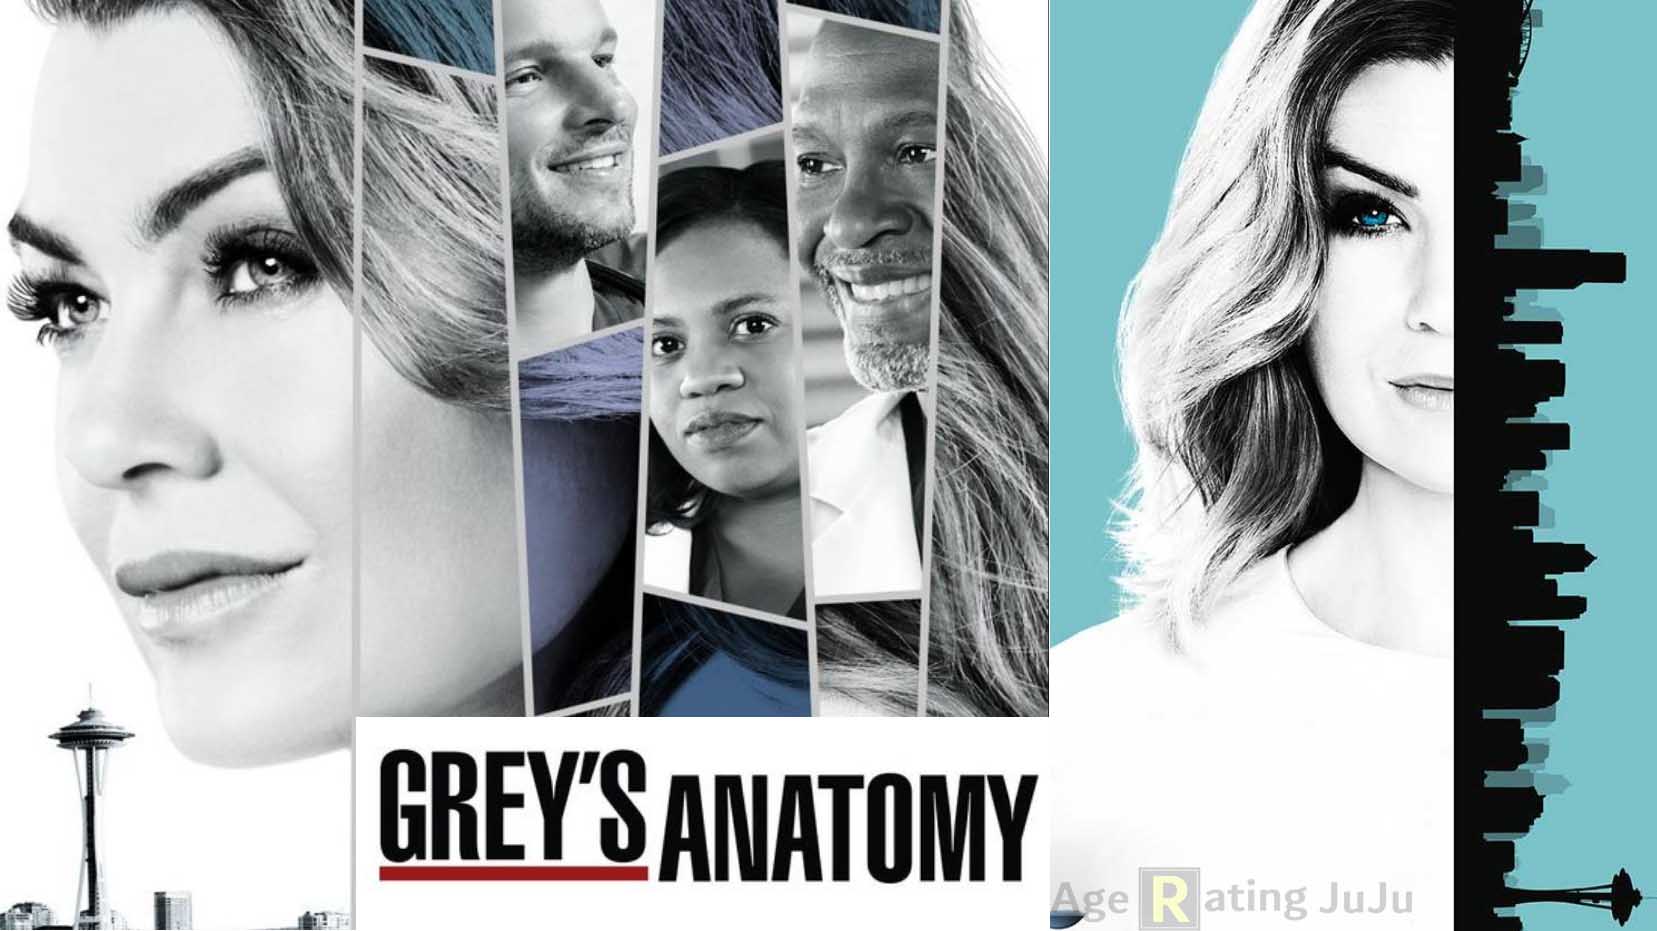 Grey's Anatomy Age Rating 2018 - TV Show Poster Images and Wallpapers